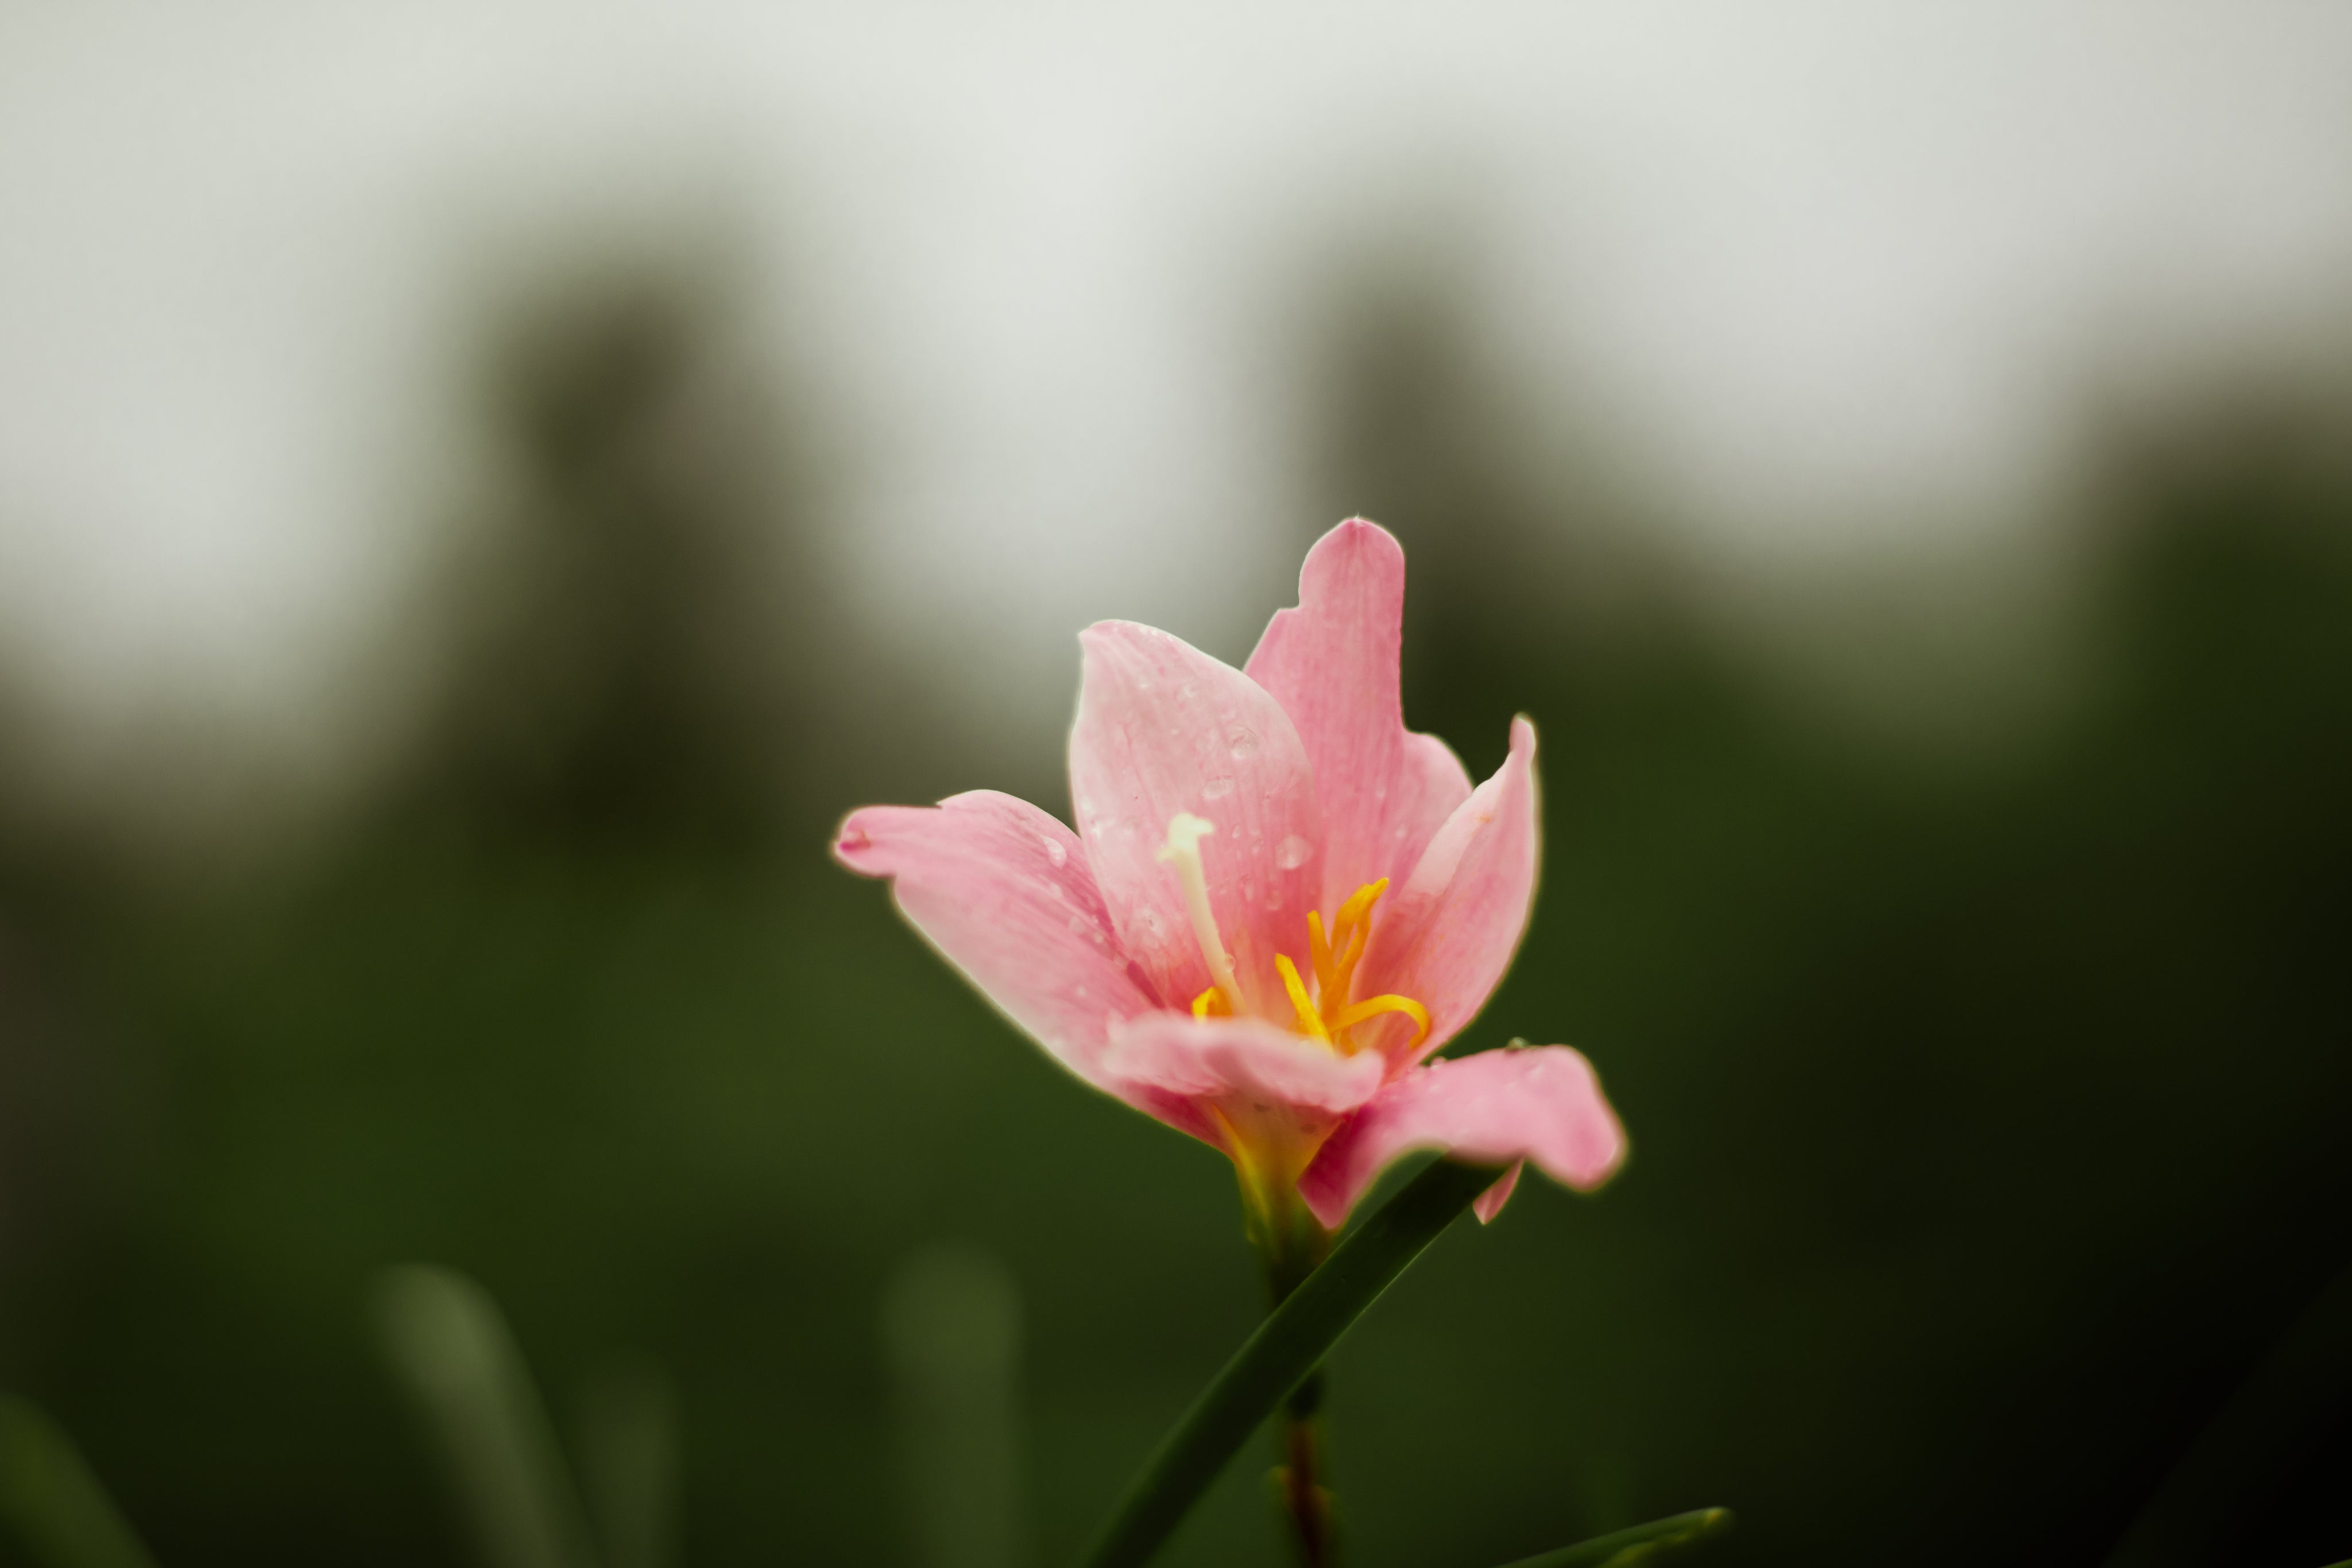 dew-covered-pink-flower-with-a-yellow-center.jpg